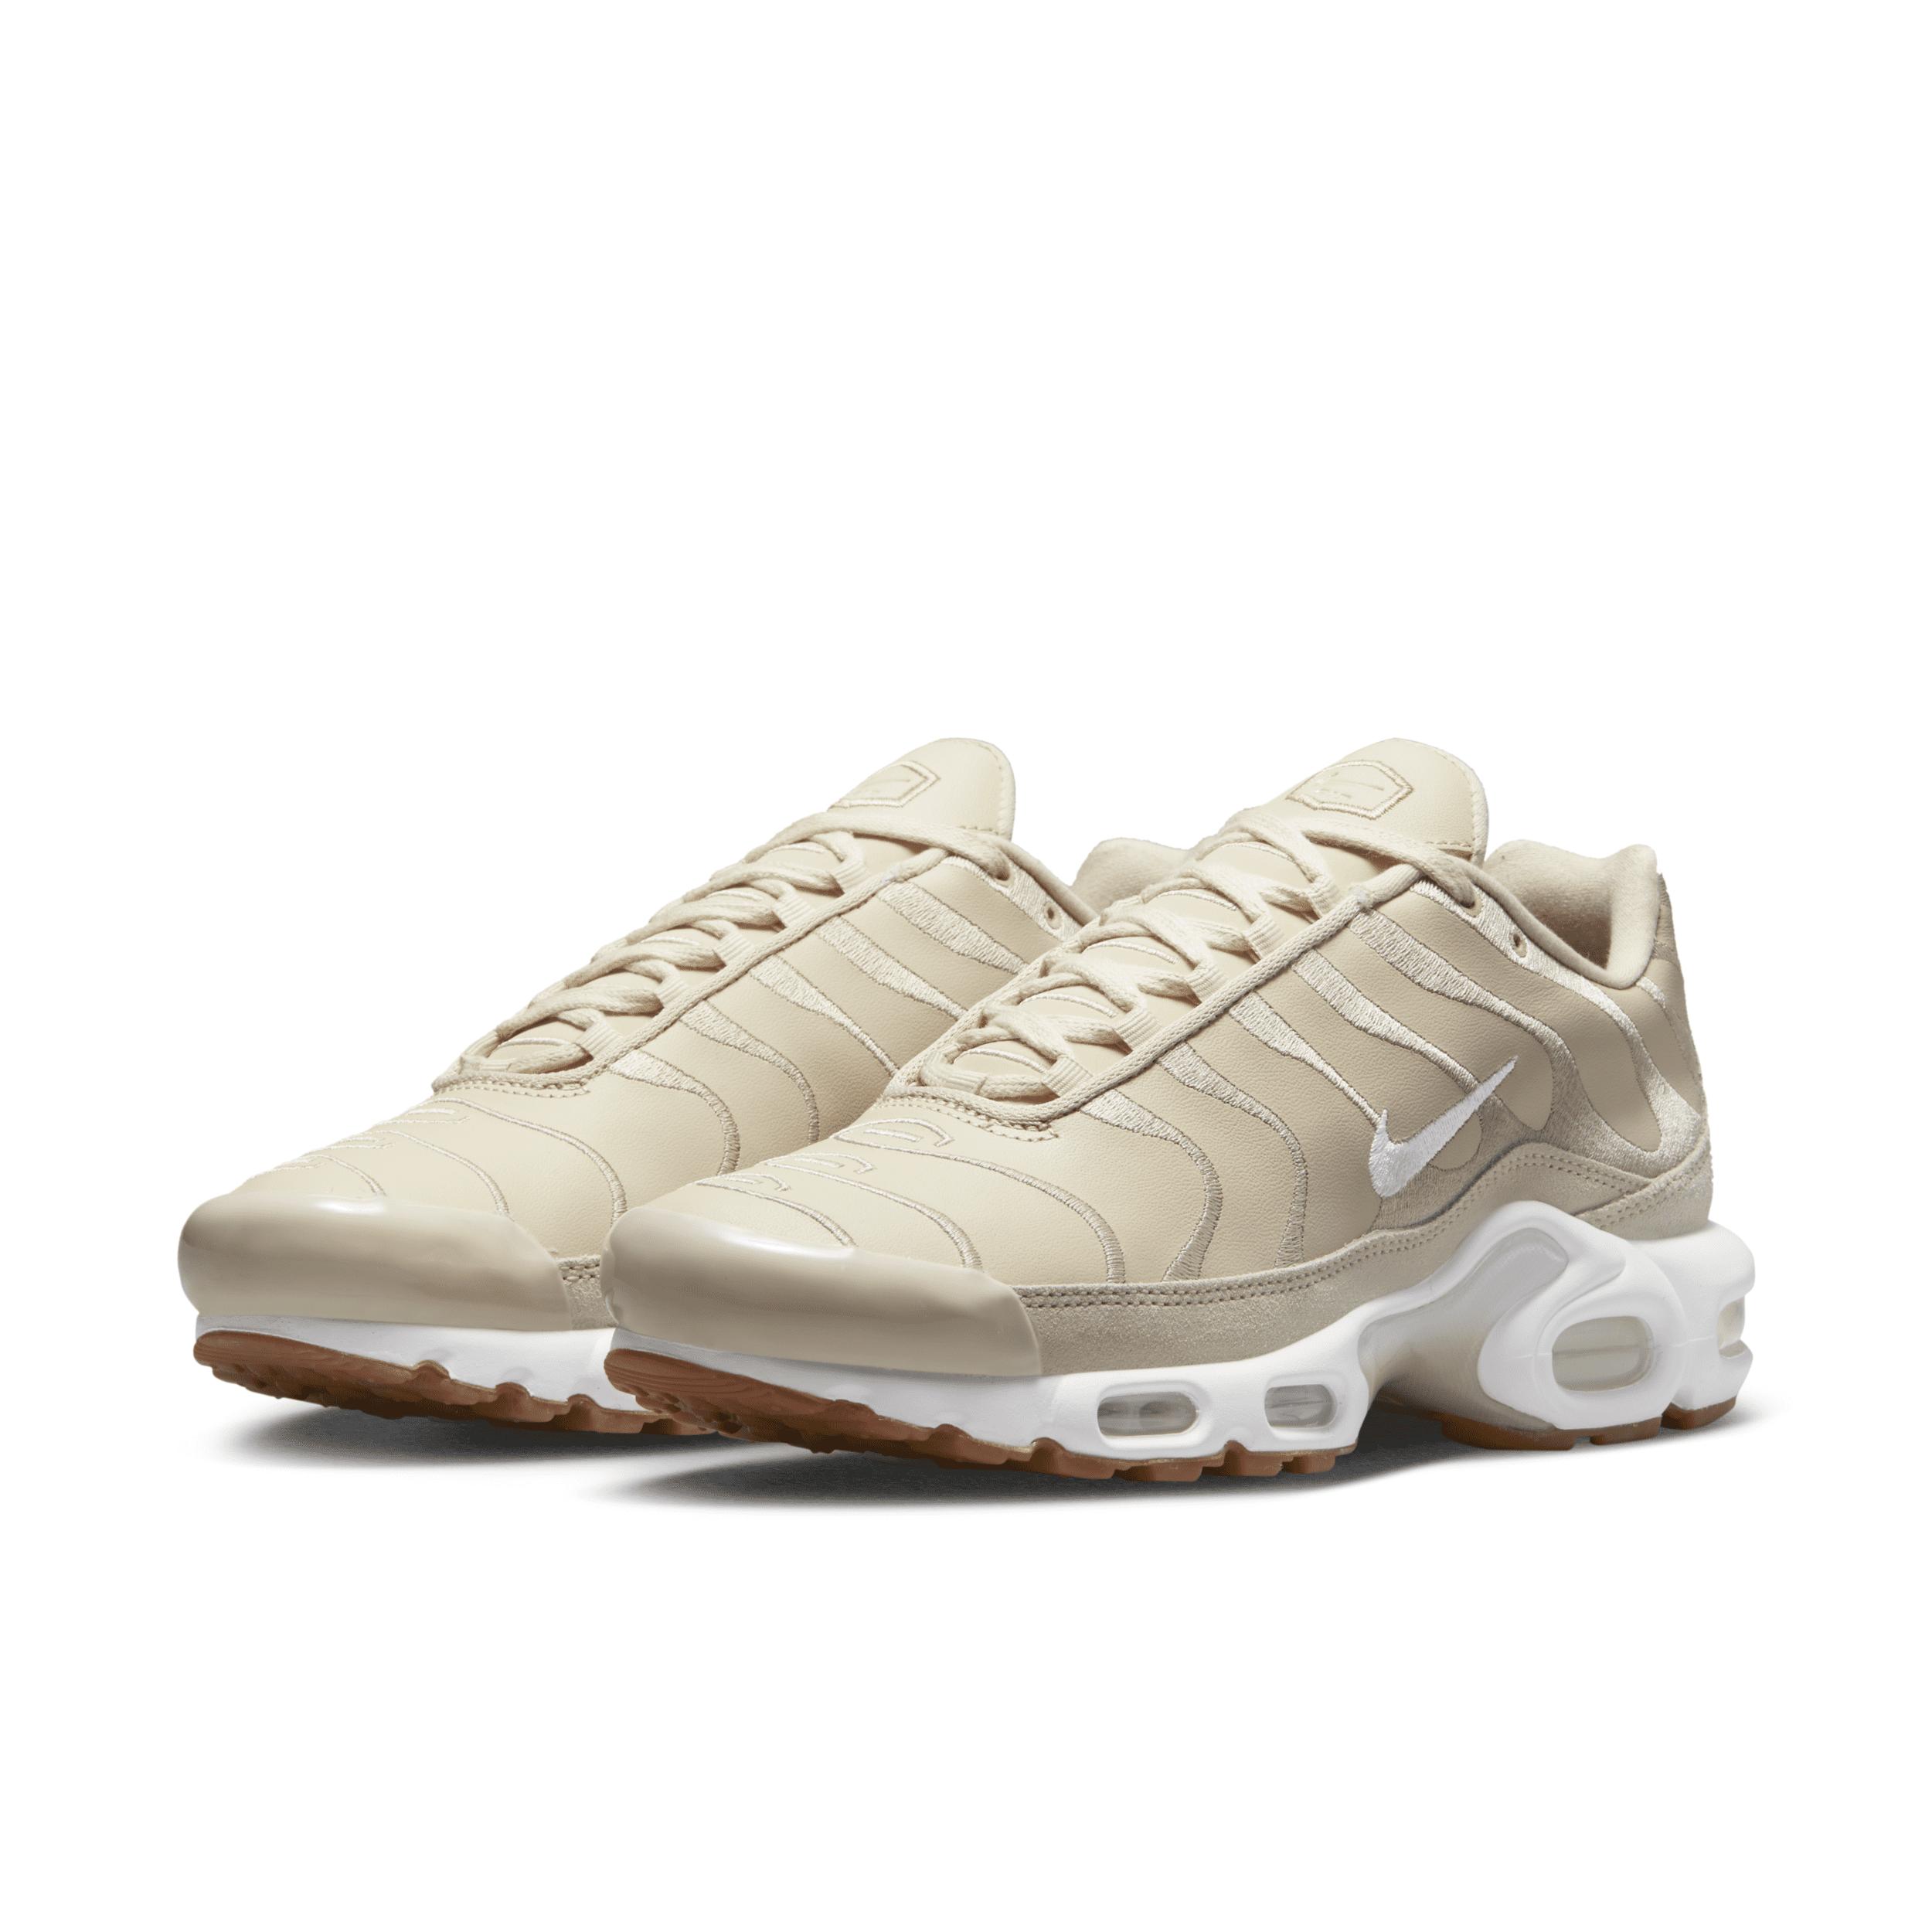 Nike Air Max Plus Prm Shoes in White | Lyst